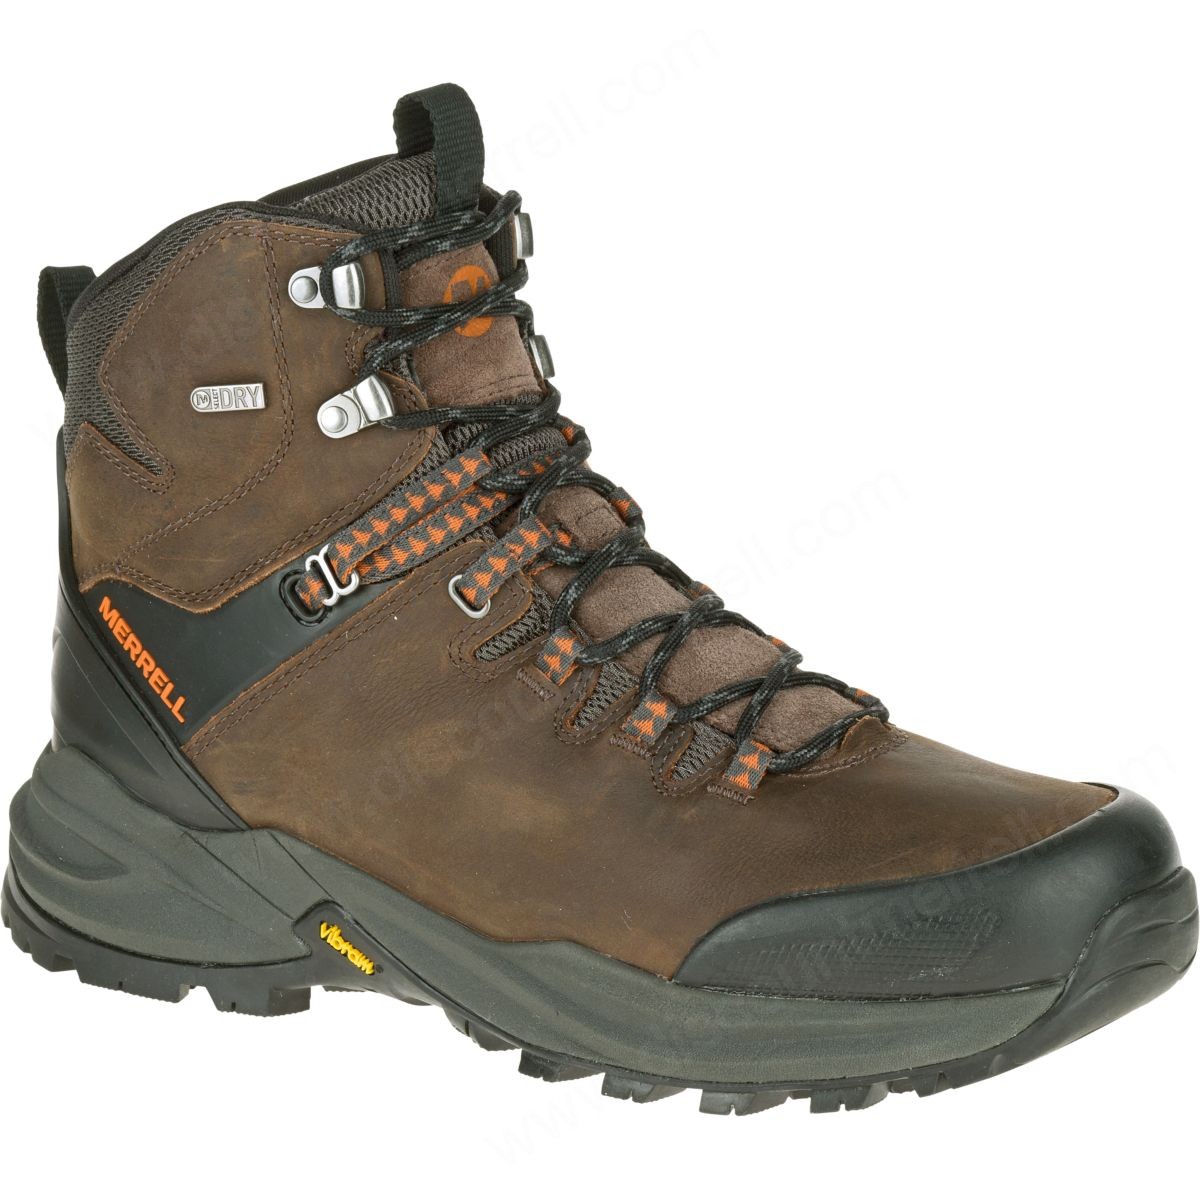 Merrell Man's Phaserbound Waterproof Clay - Merrell Man's Phaserbound Waterproof Clay